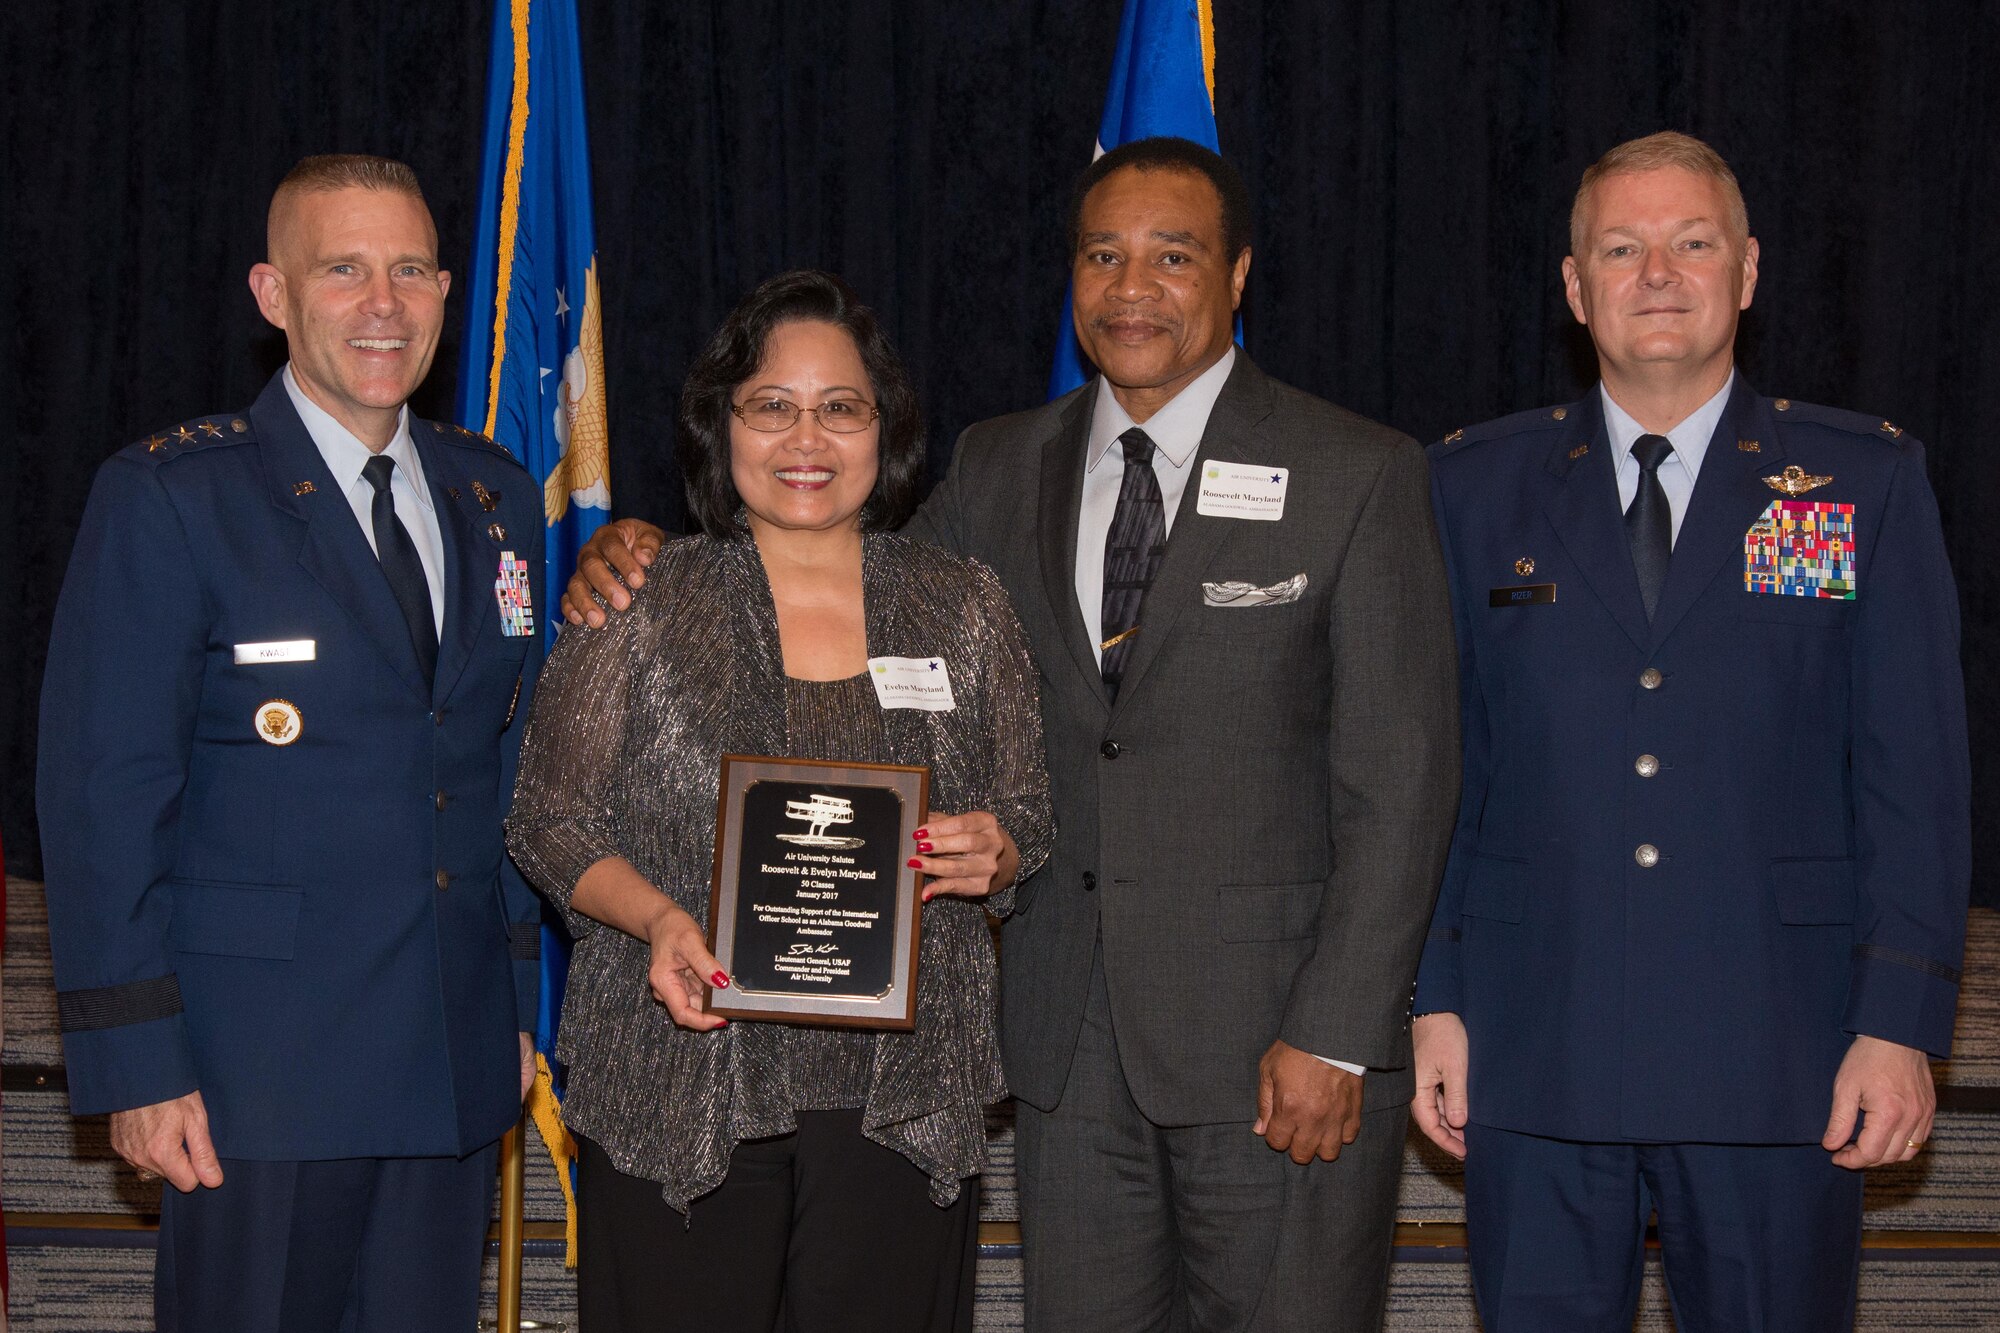 Alabama Goodwill Ambassadors, Roosevelt and Evelyn Maryland receive a plague and thanks from Lt. Gen. Steven Kwast, Air University commander and president, during the Alabama Goodwill Ambassadors Appreciation Night event, Jan. 17, 2017, Maxwell Air Force Base, Ala. Roosevelt and Evelyn has sponsored 50 International Officer School classes, the most out of all the other recipients that night.  (US Air Force photo by Trey Ward)